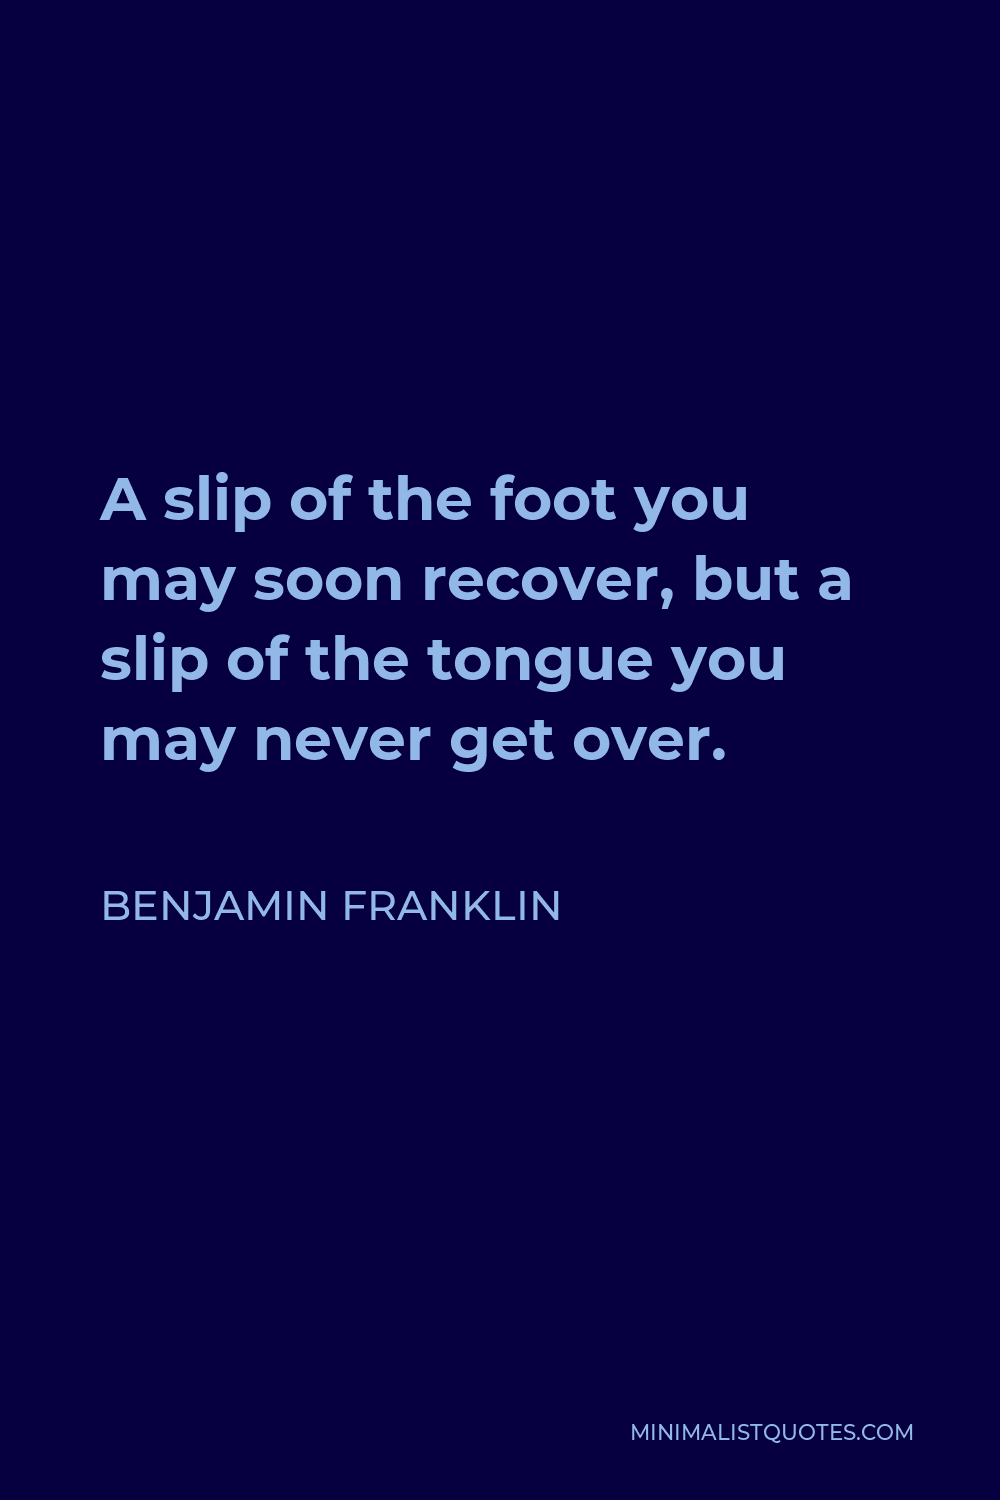 Benjamin Franklin Quote - A slip of the foot you may soon recover, but a slip of the tongue you may never get over.